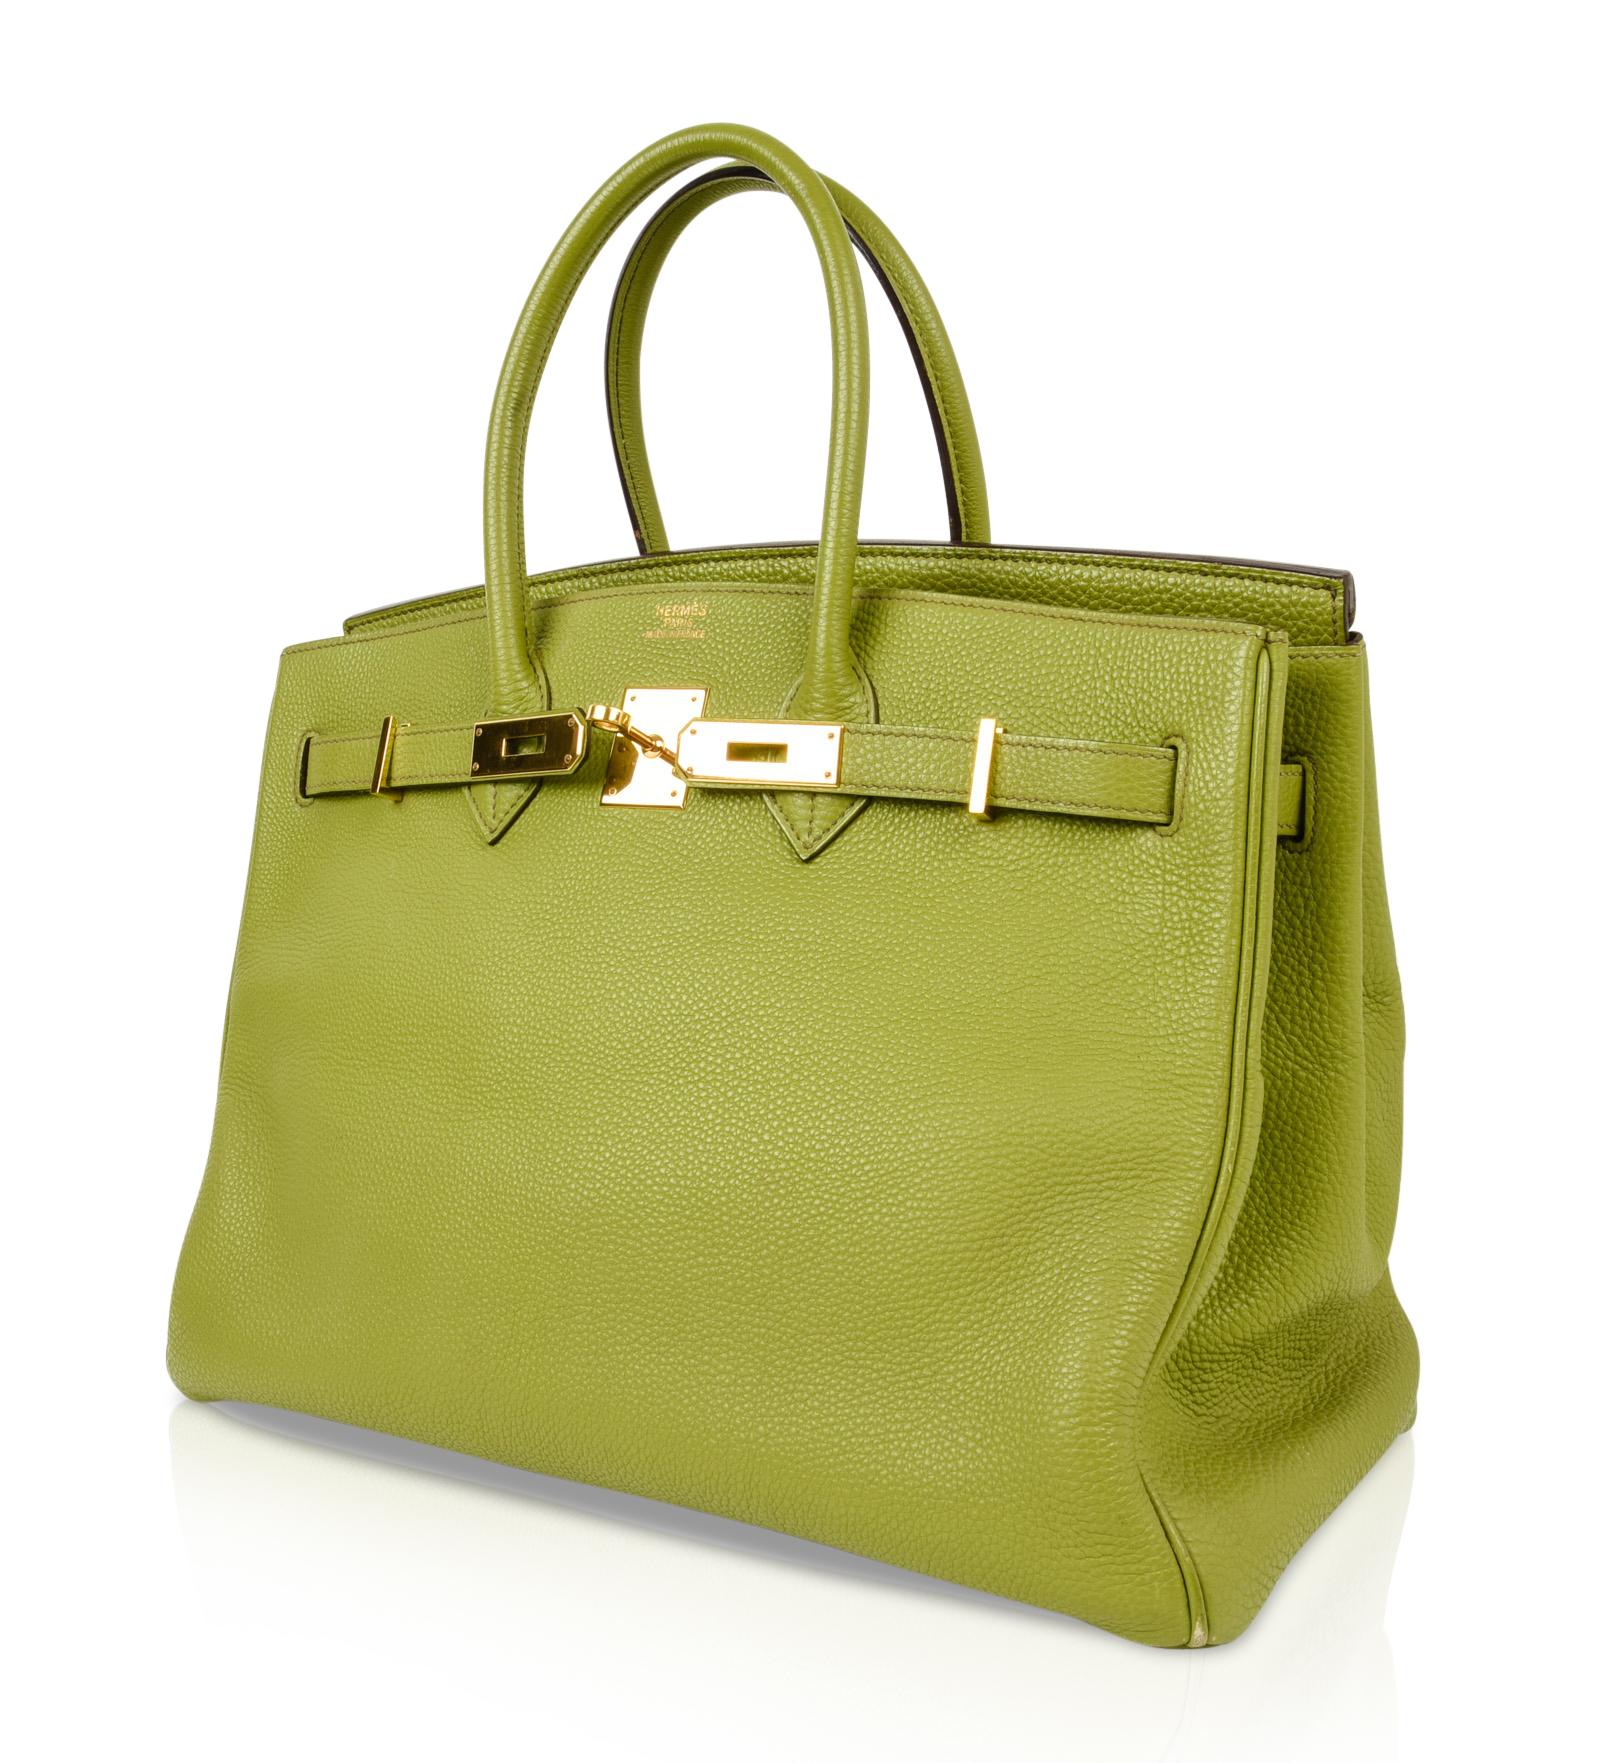 Guaranteed authentic Hermes Birkin 35 no longer produced Chartreuse. 
Togo leather lush with Gold hardware.
Comes with lock and keys in the clochette and sleepers. 
She is pre loved with wear on the corners and scratches on the hardware.
Leather is